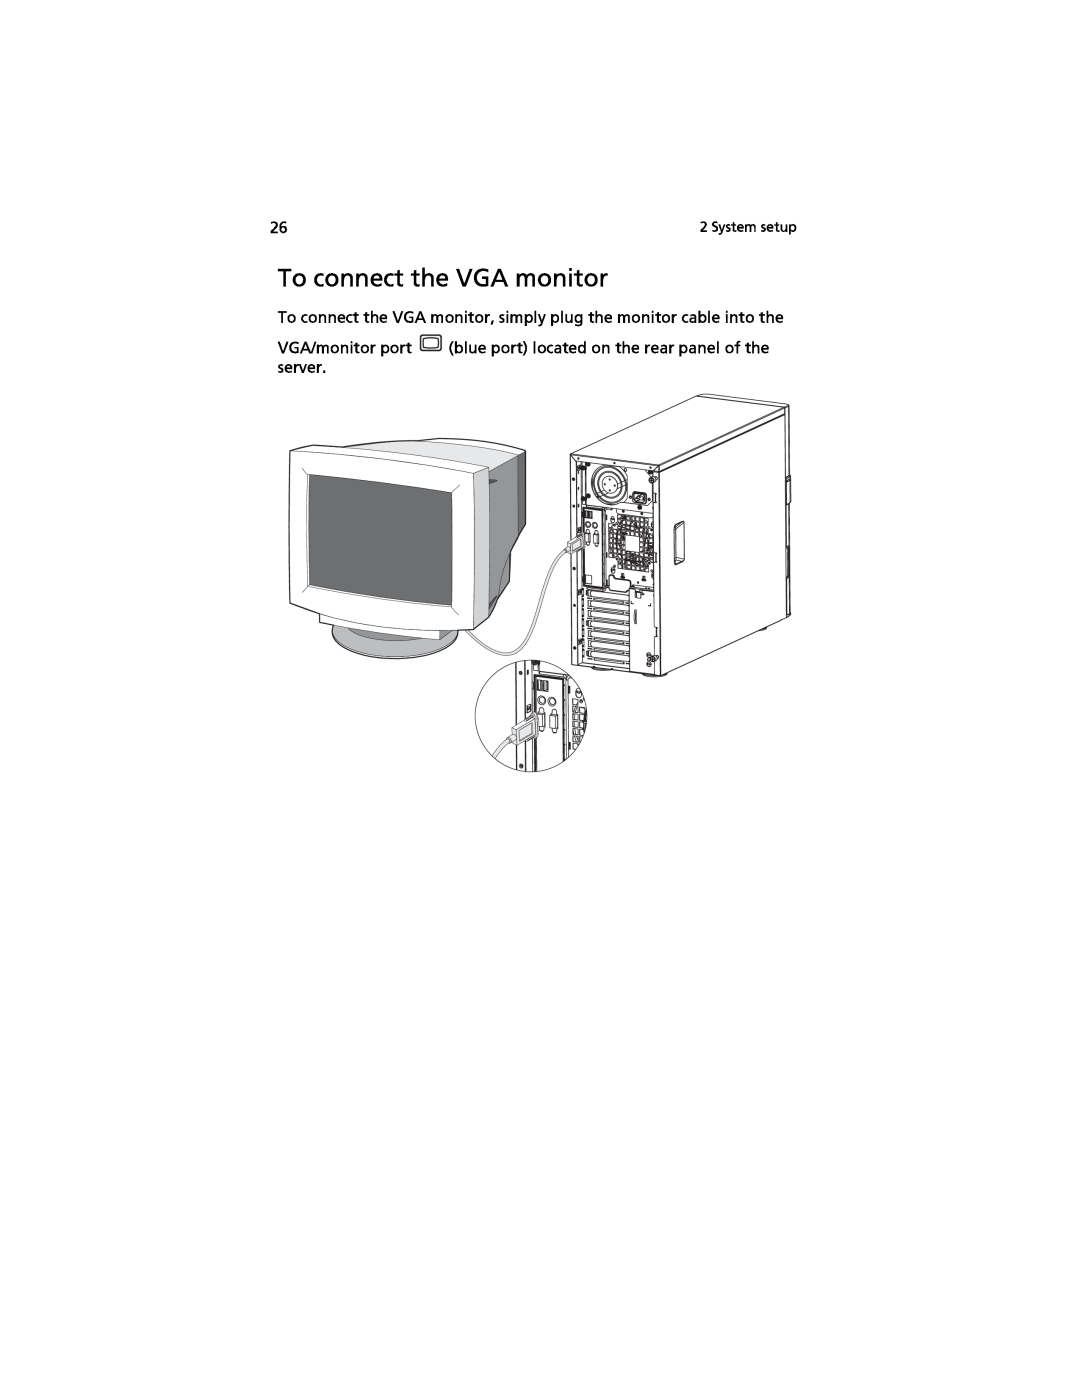 Acer G520 series manual To connect the VGA monitor, simply plug the monitor cable into the, System setup 